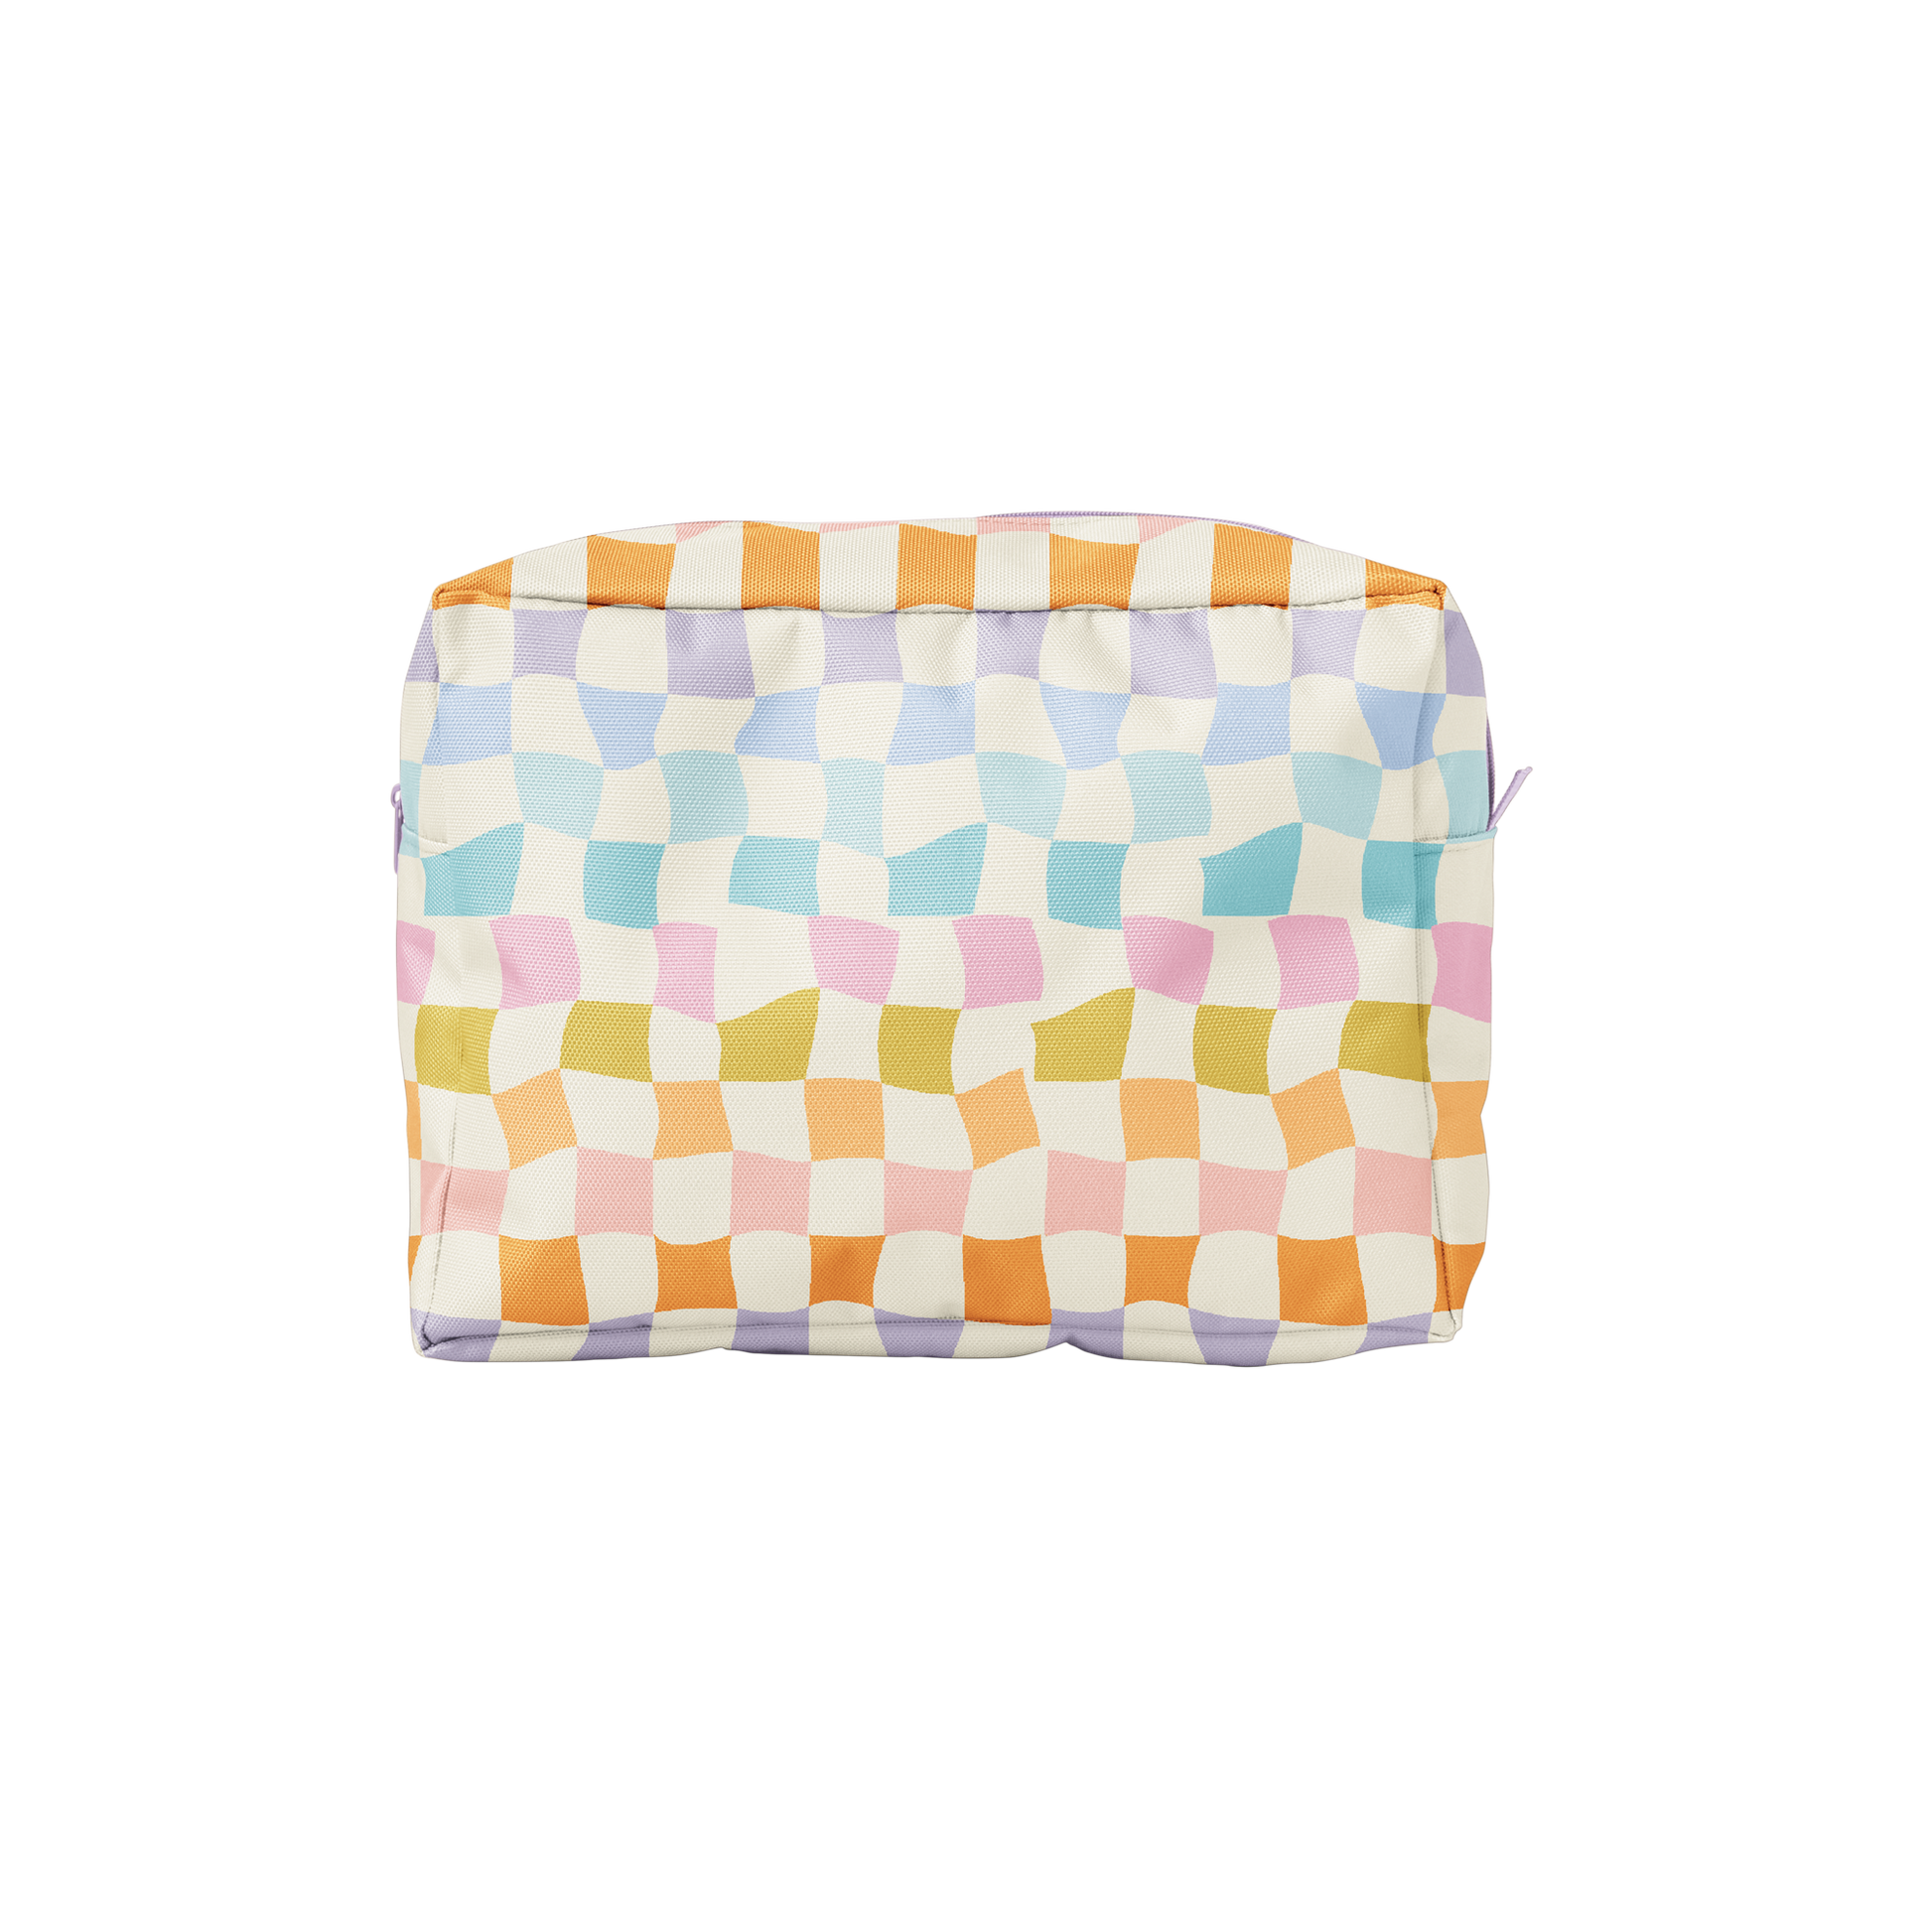 rainbow checked zippered bag on a white background.